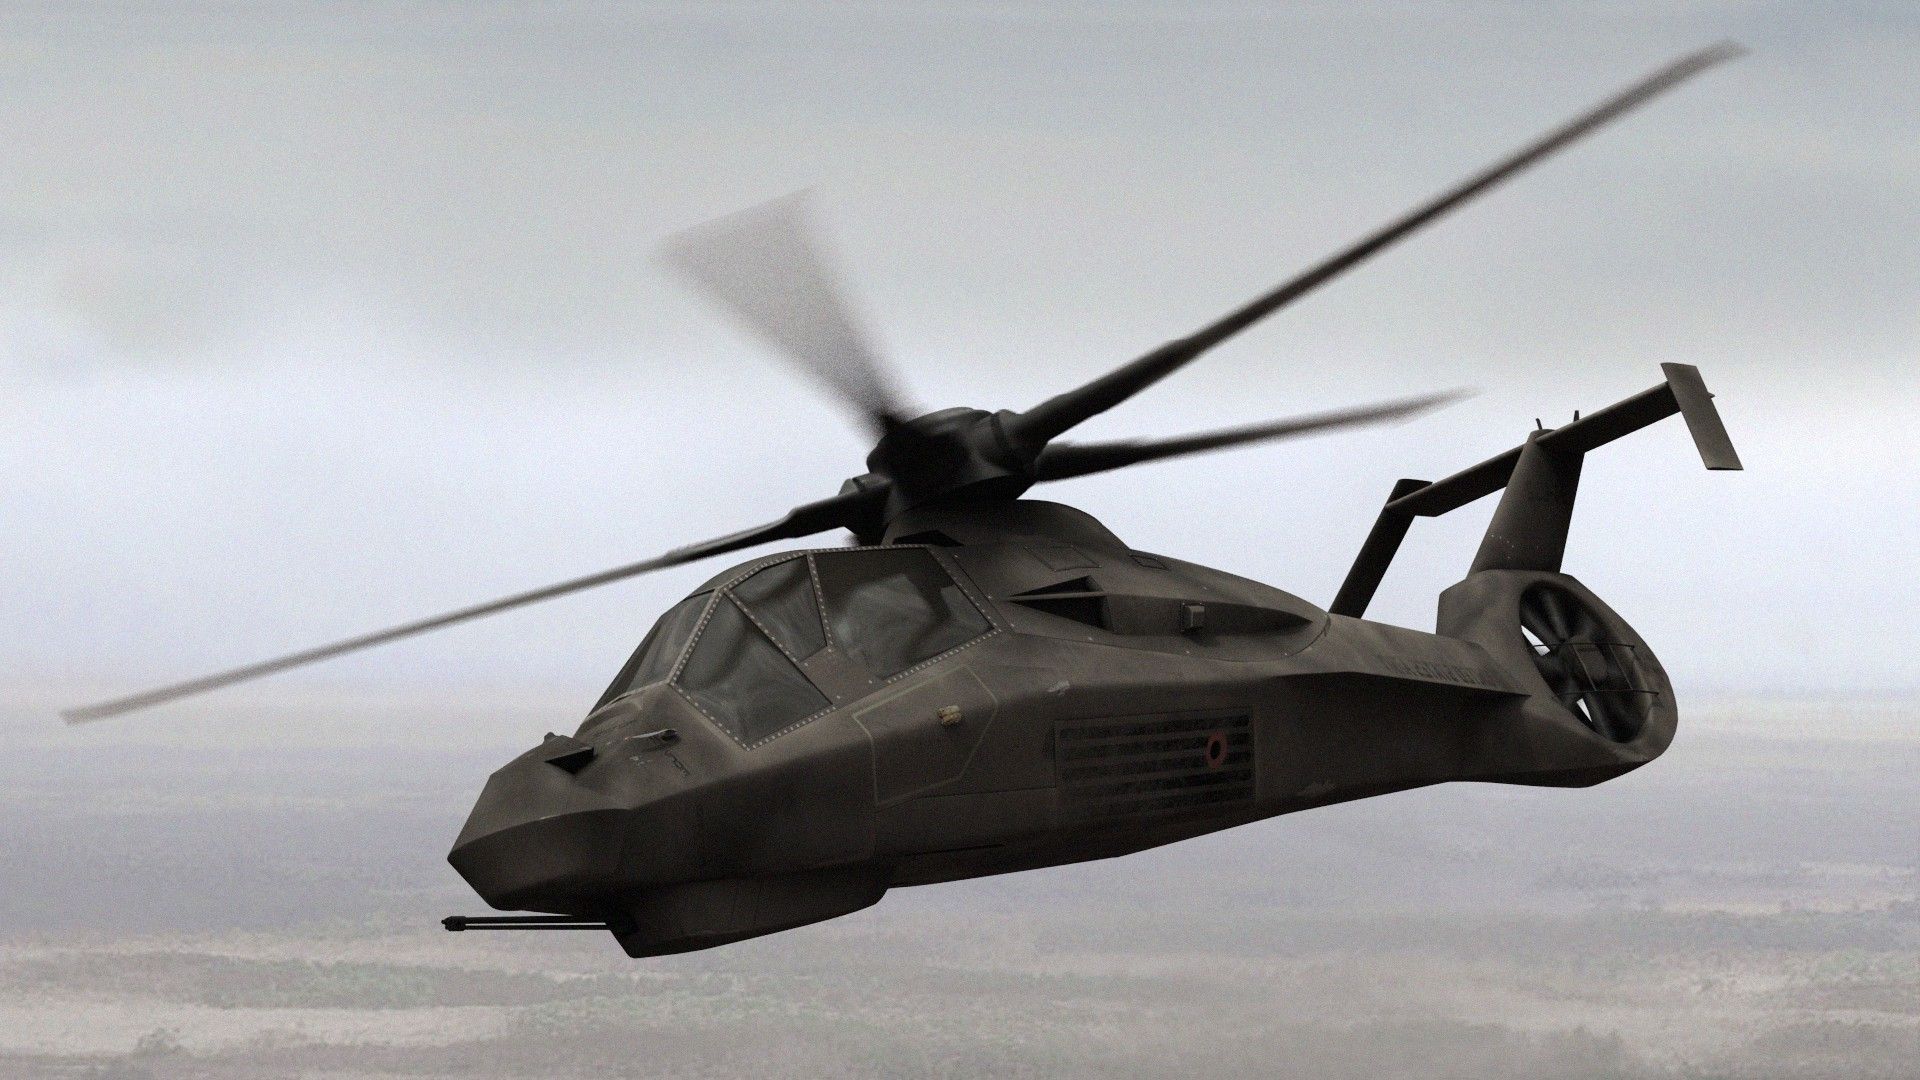 HQ Boeing-Sikorsky RAH-66 Comanche Wallpapers | File 276.55Kb